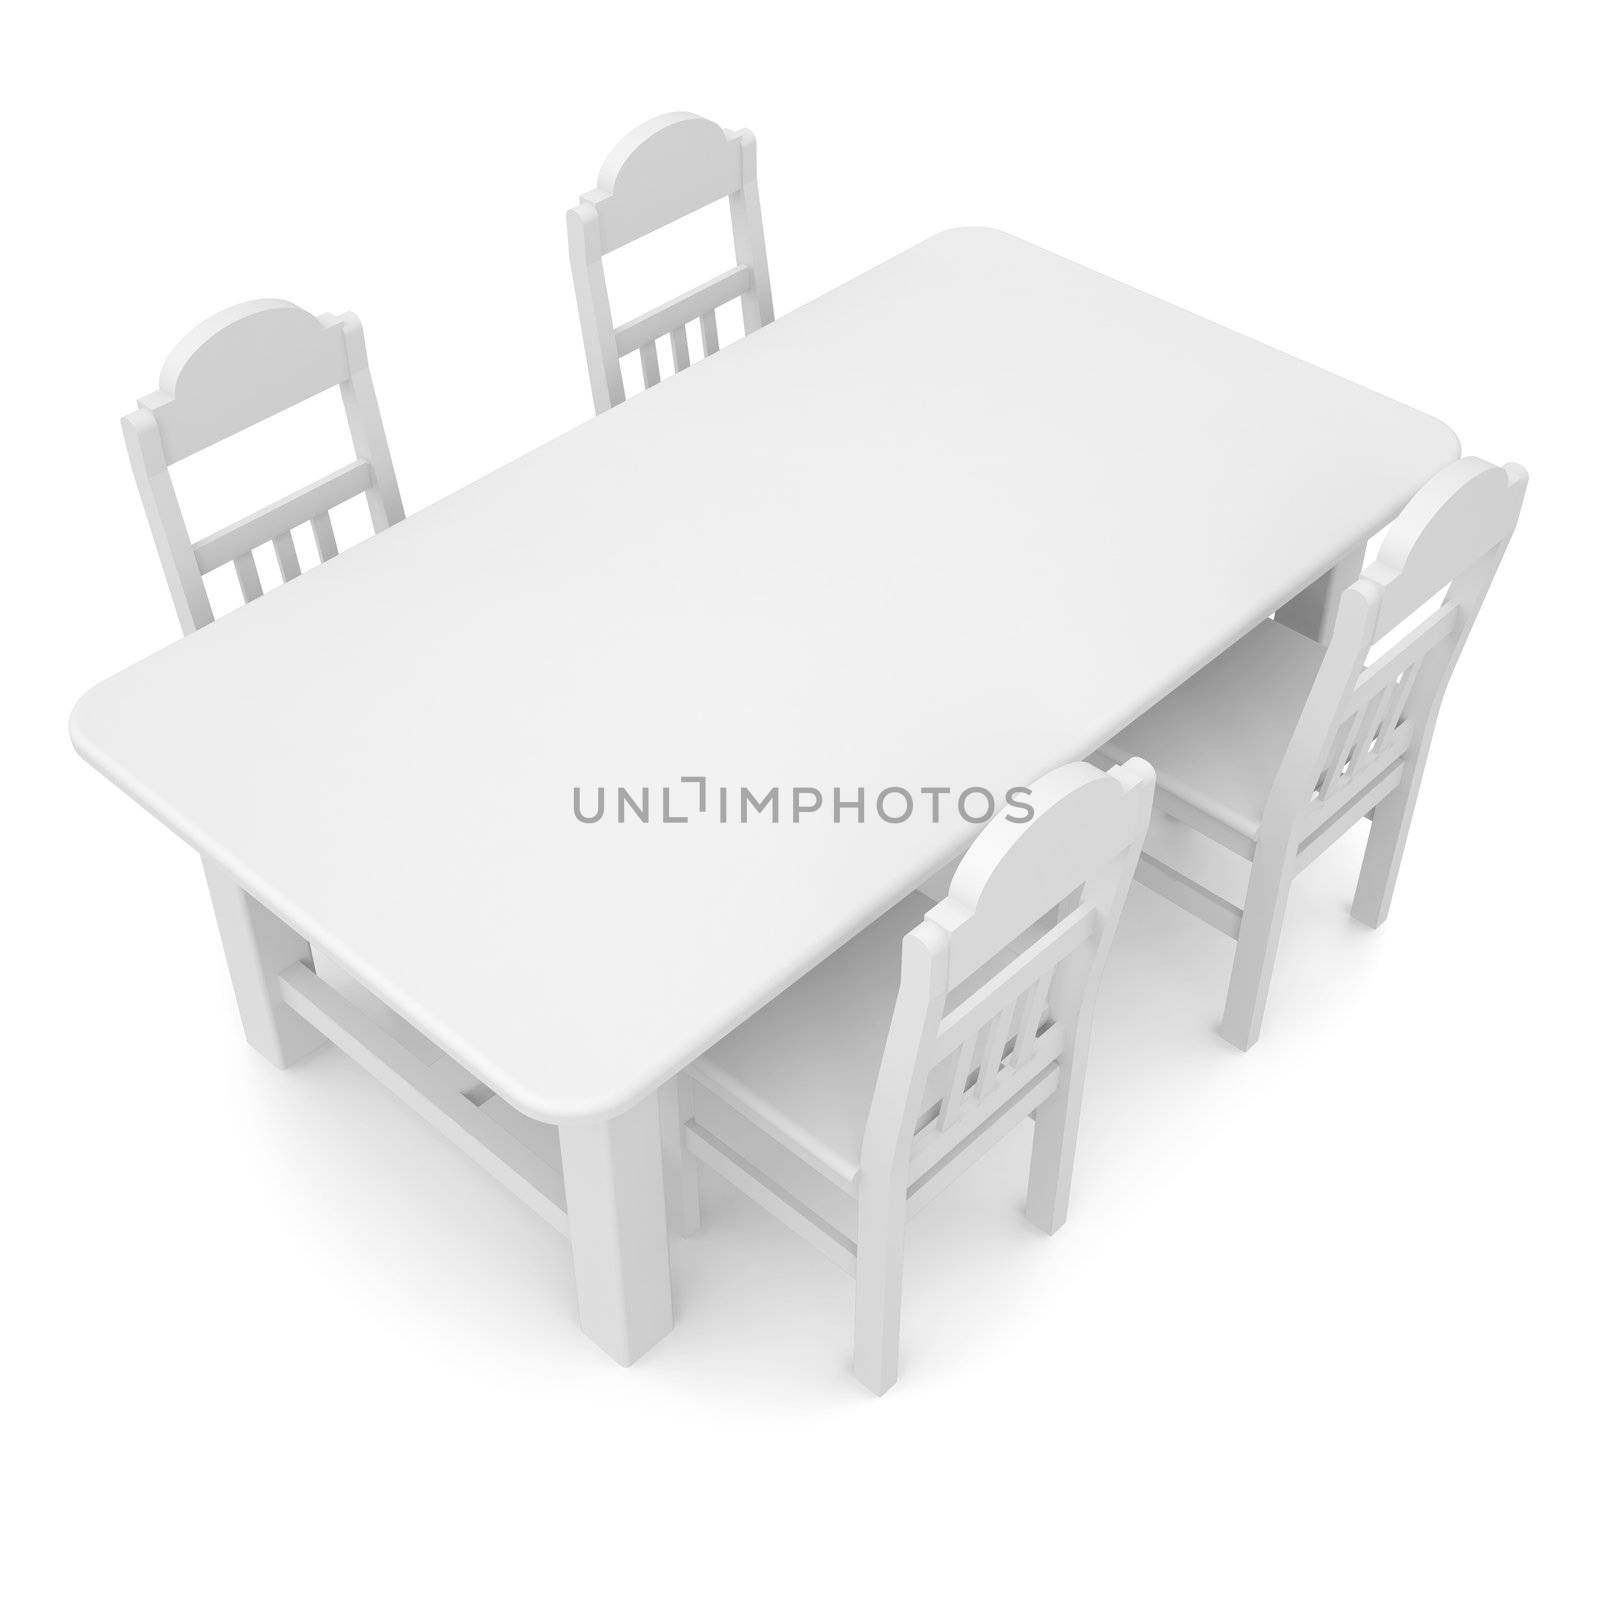 White table and chairs. Isolated render on a white background